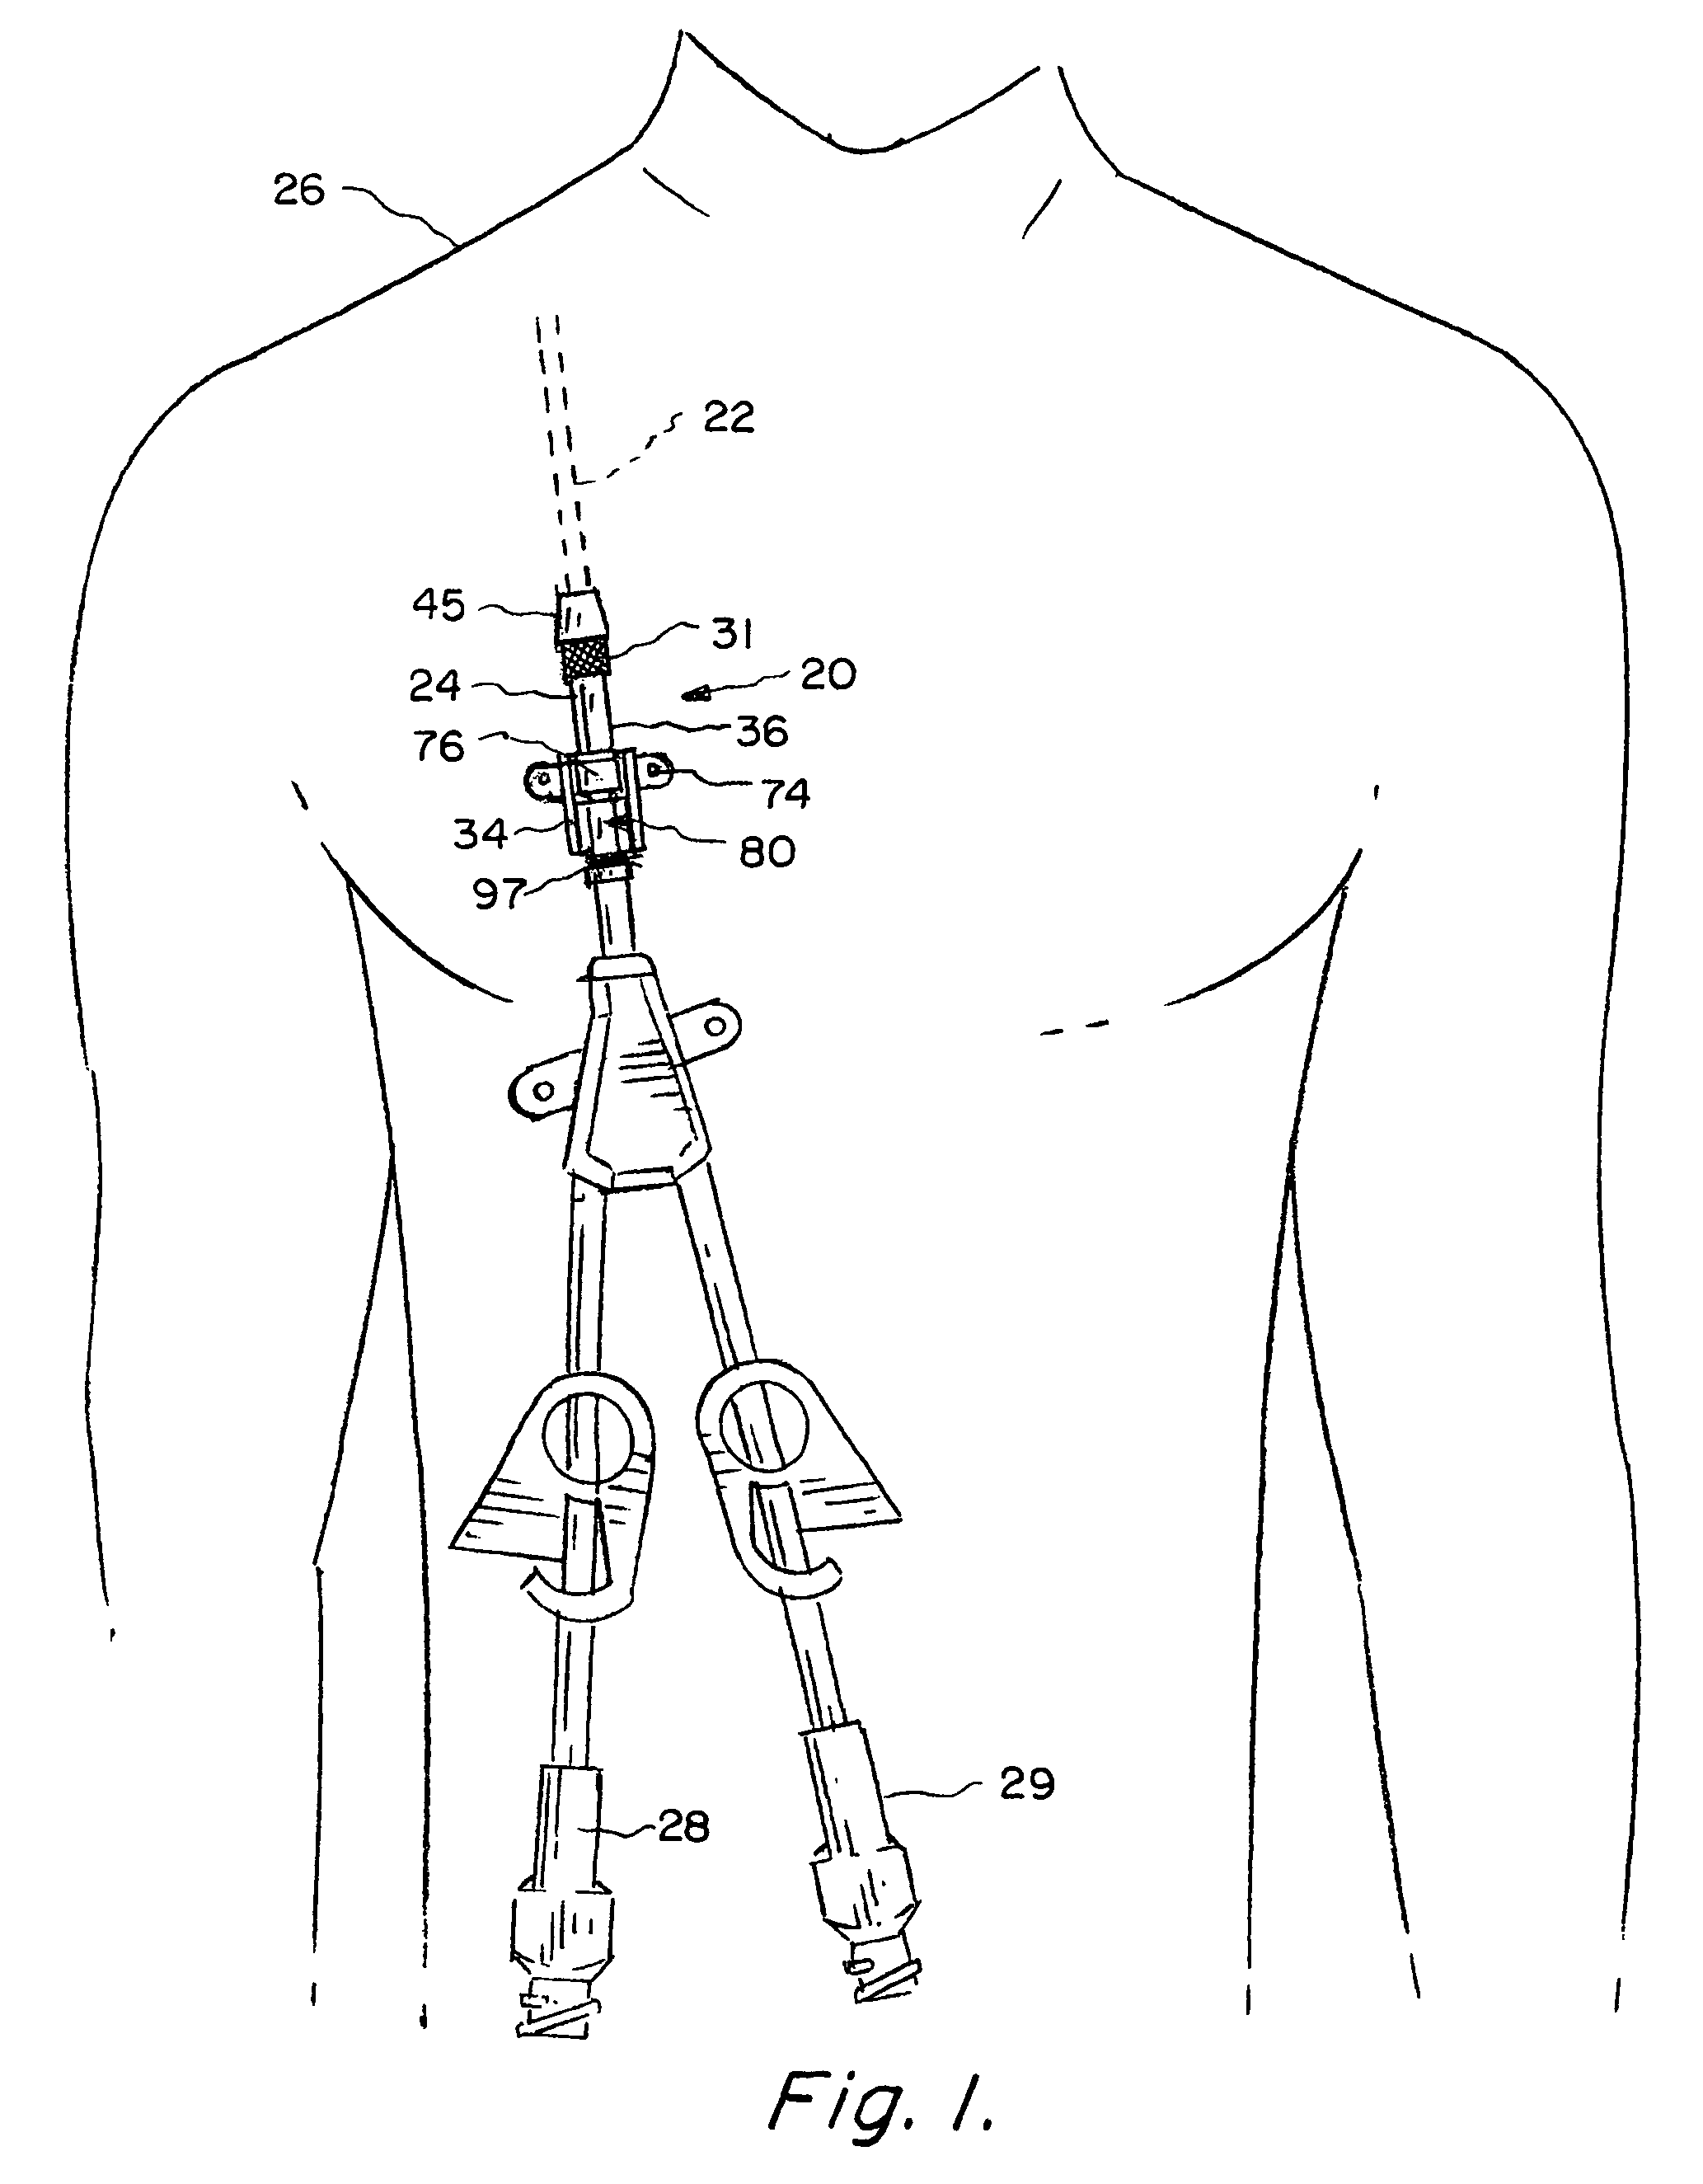 Enhanced apparatus for percutaneous catheter implantation and replacement